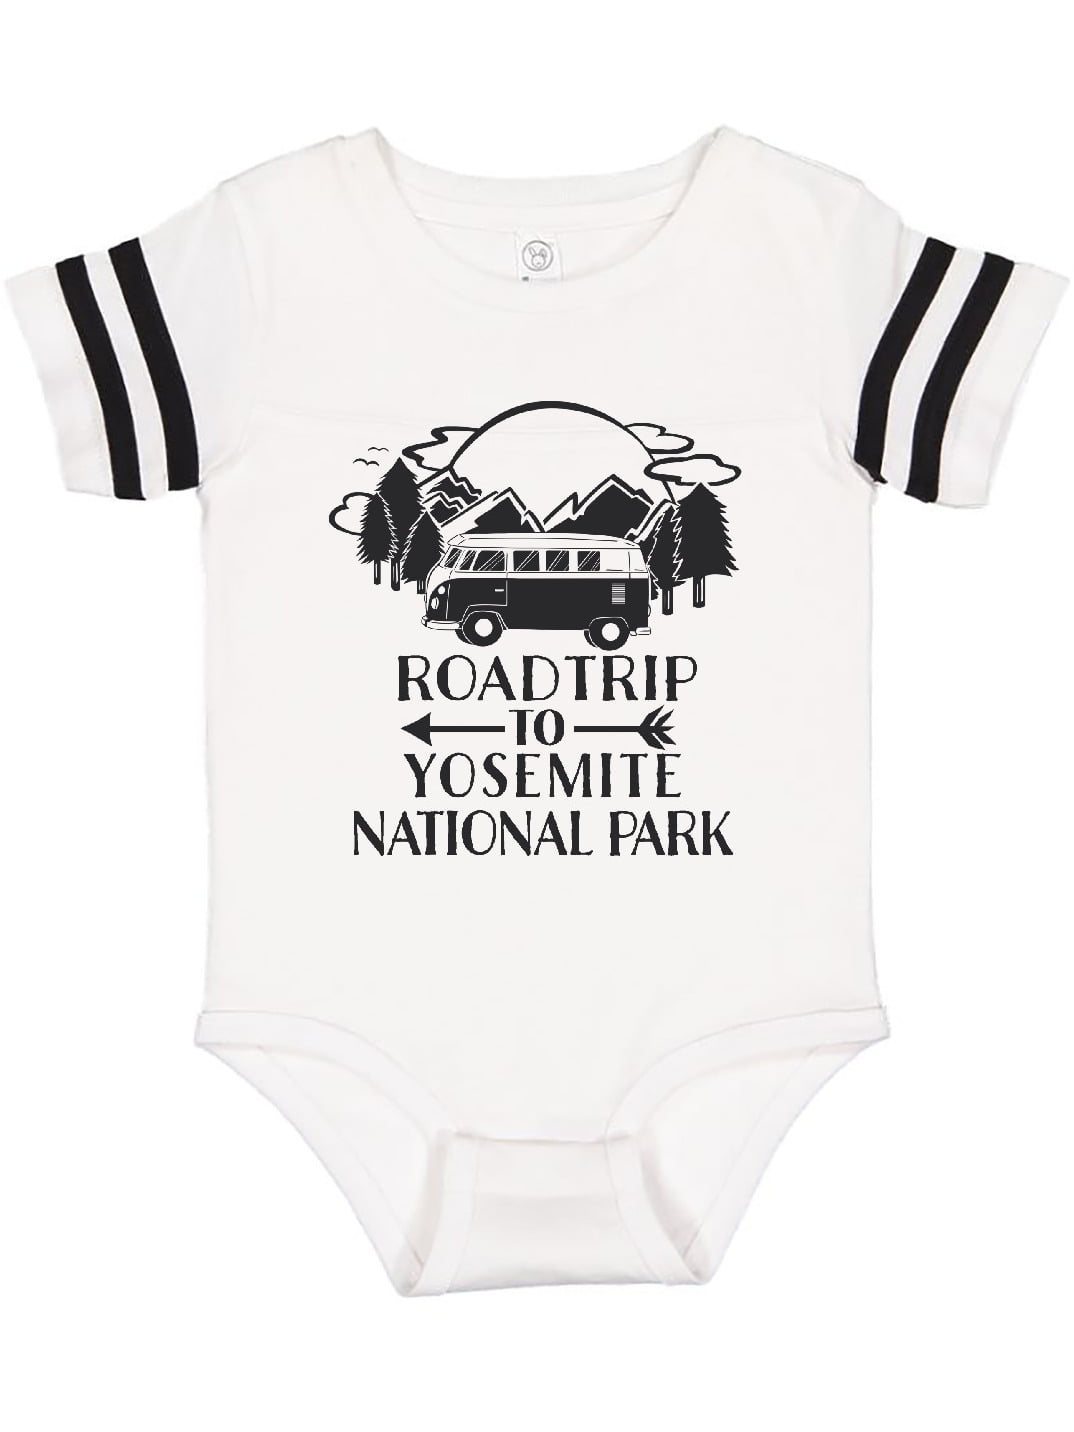 Yosemite National Park Newborn Baby Long Sleeve Bodysuits Rompers Outfits 